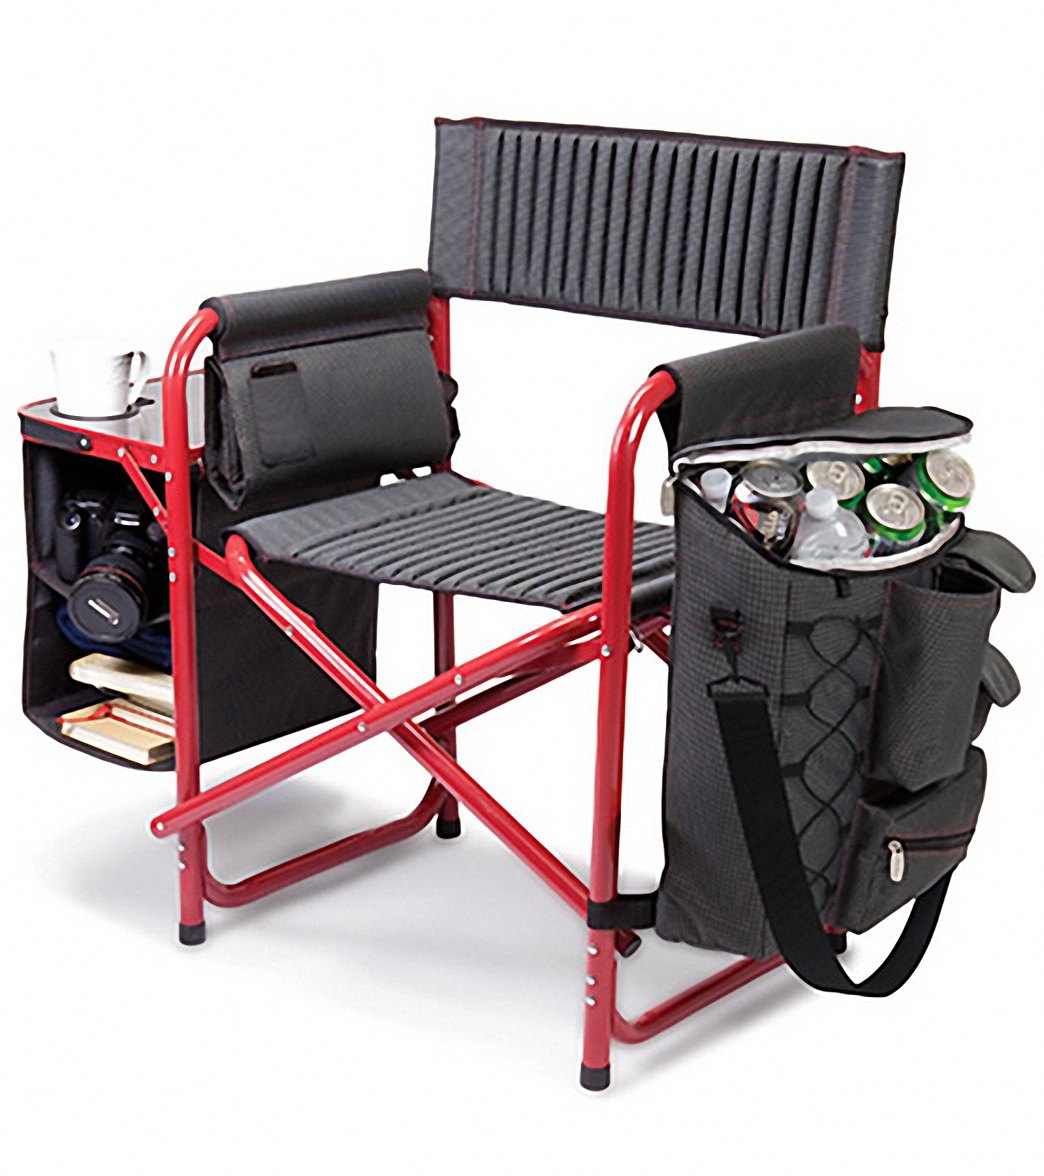 Picnic Time Picnic Fusion Backpack Cooler Chair